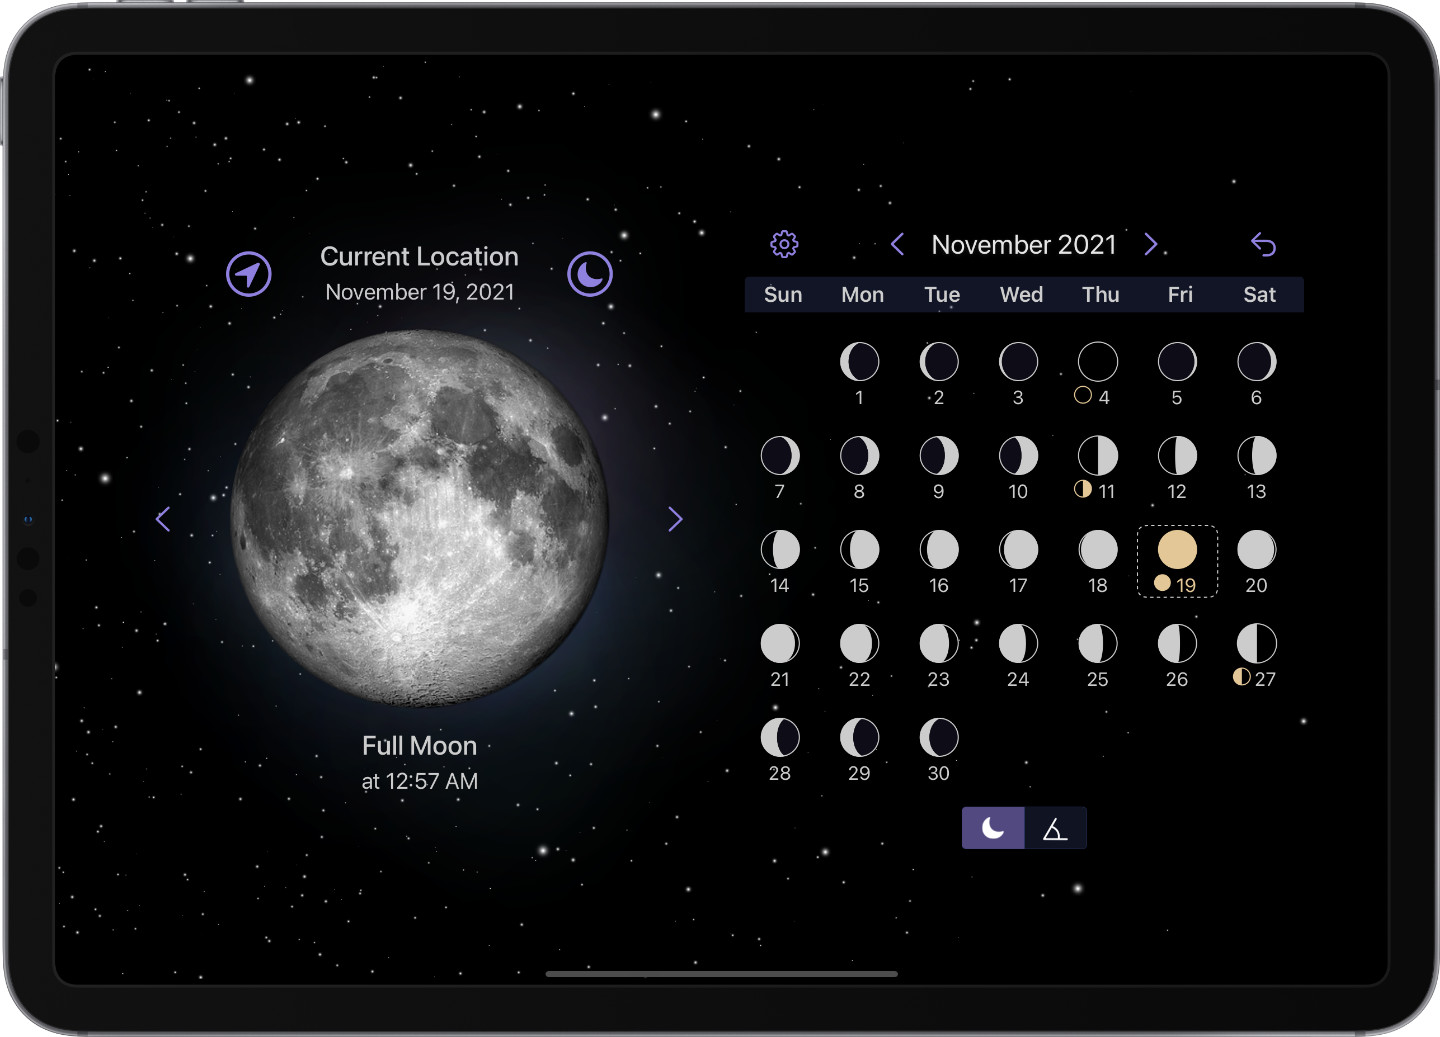 Moon phase calendar based on your location in a beautiful interface.